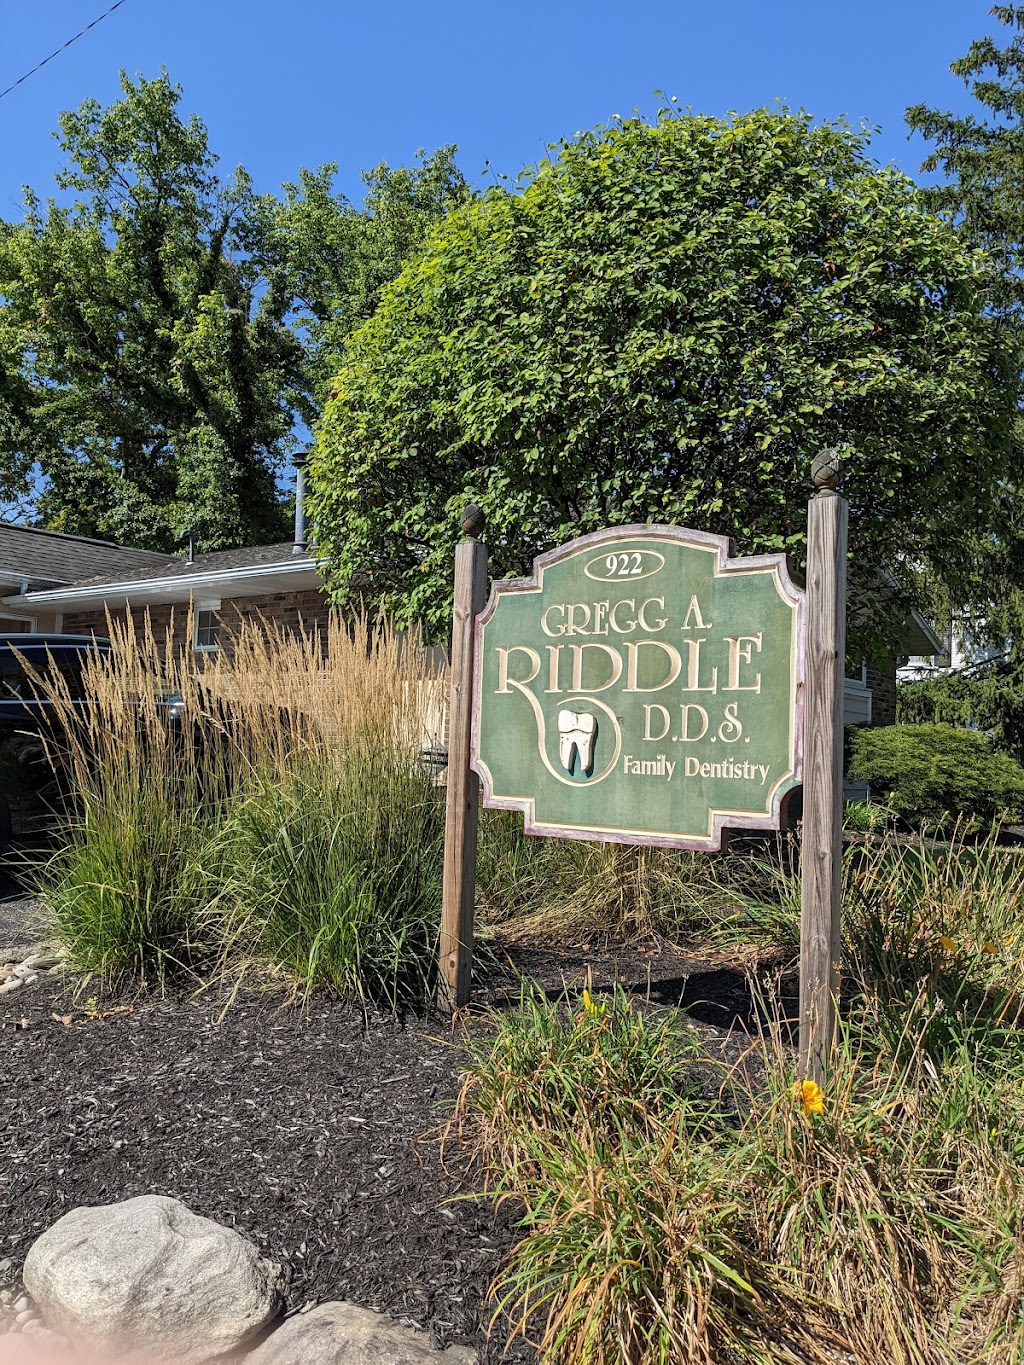 Riddle Gregg A DDS | 922 E Central Ave, Miamisburg, OH 45342 | Phone: (937) 866-1141